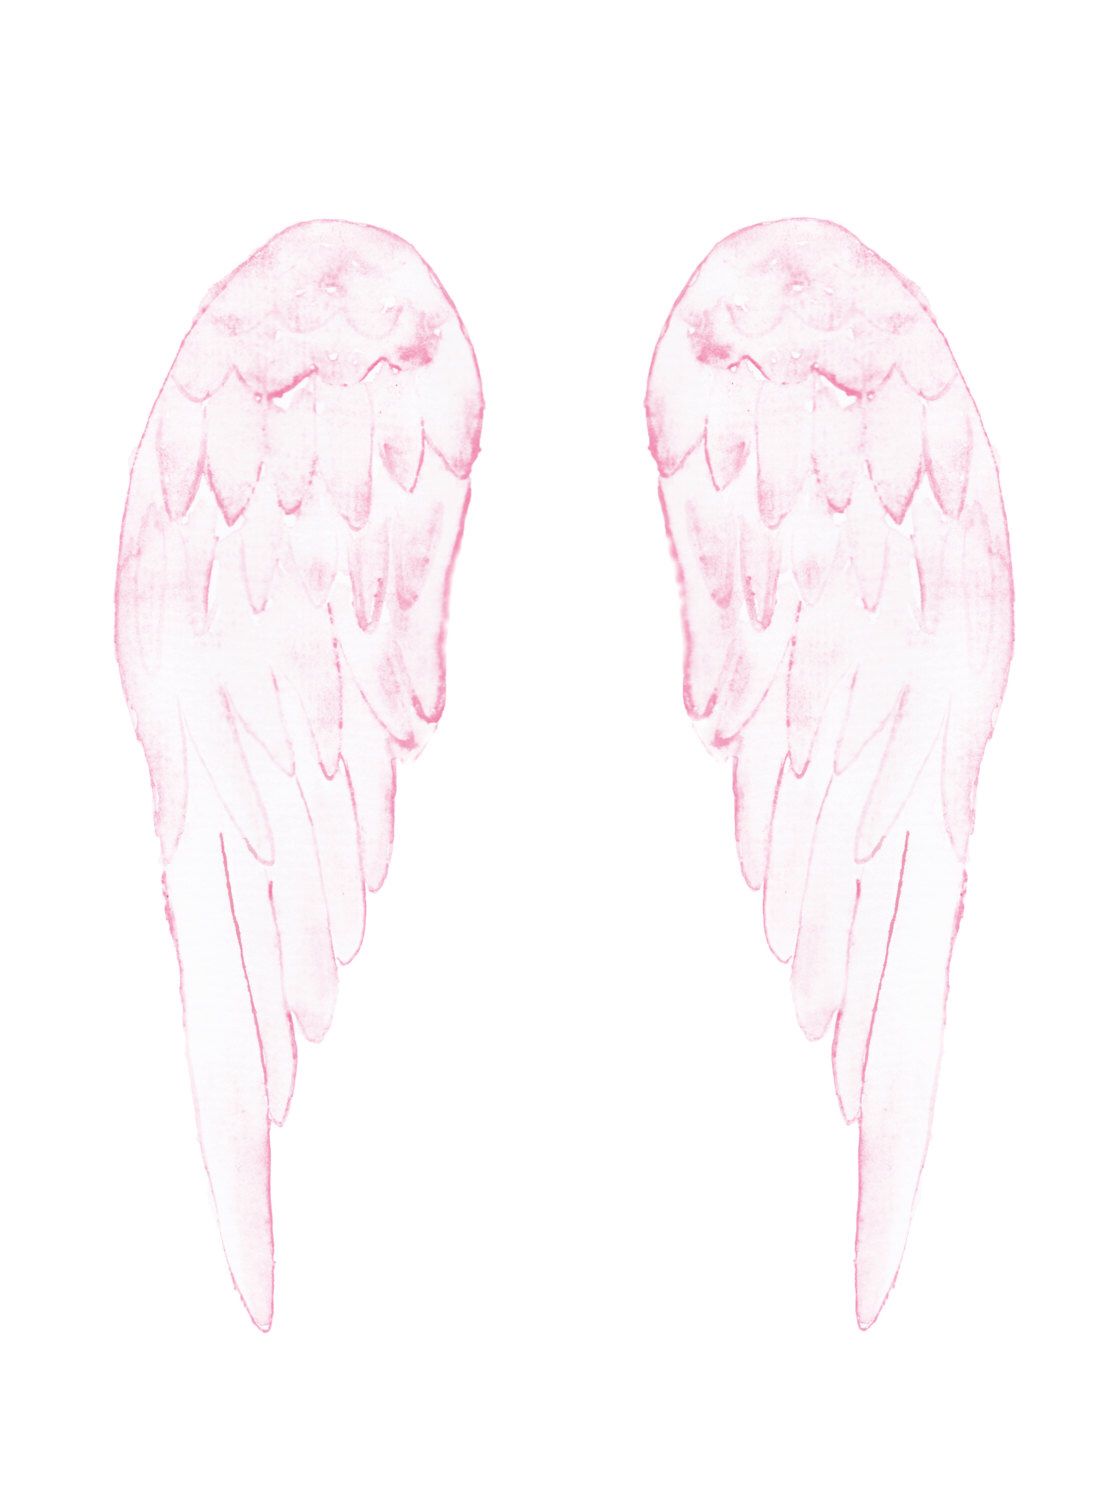 A pair of angel wings painted in pink on a white background - Wings